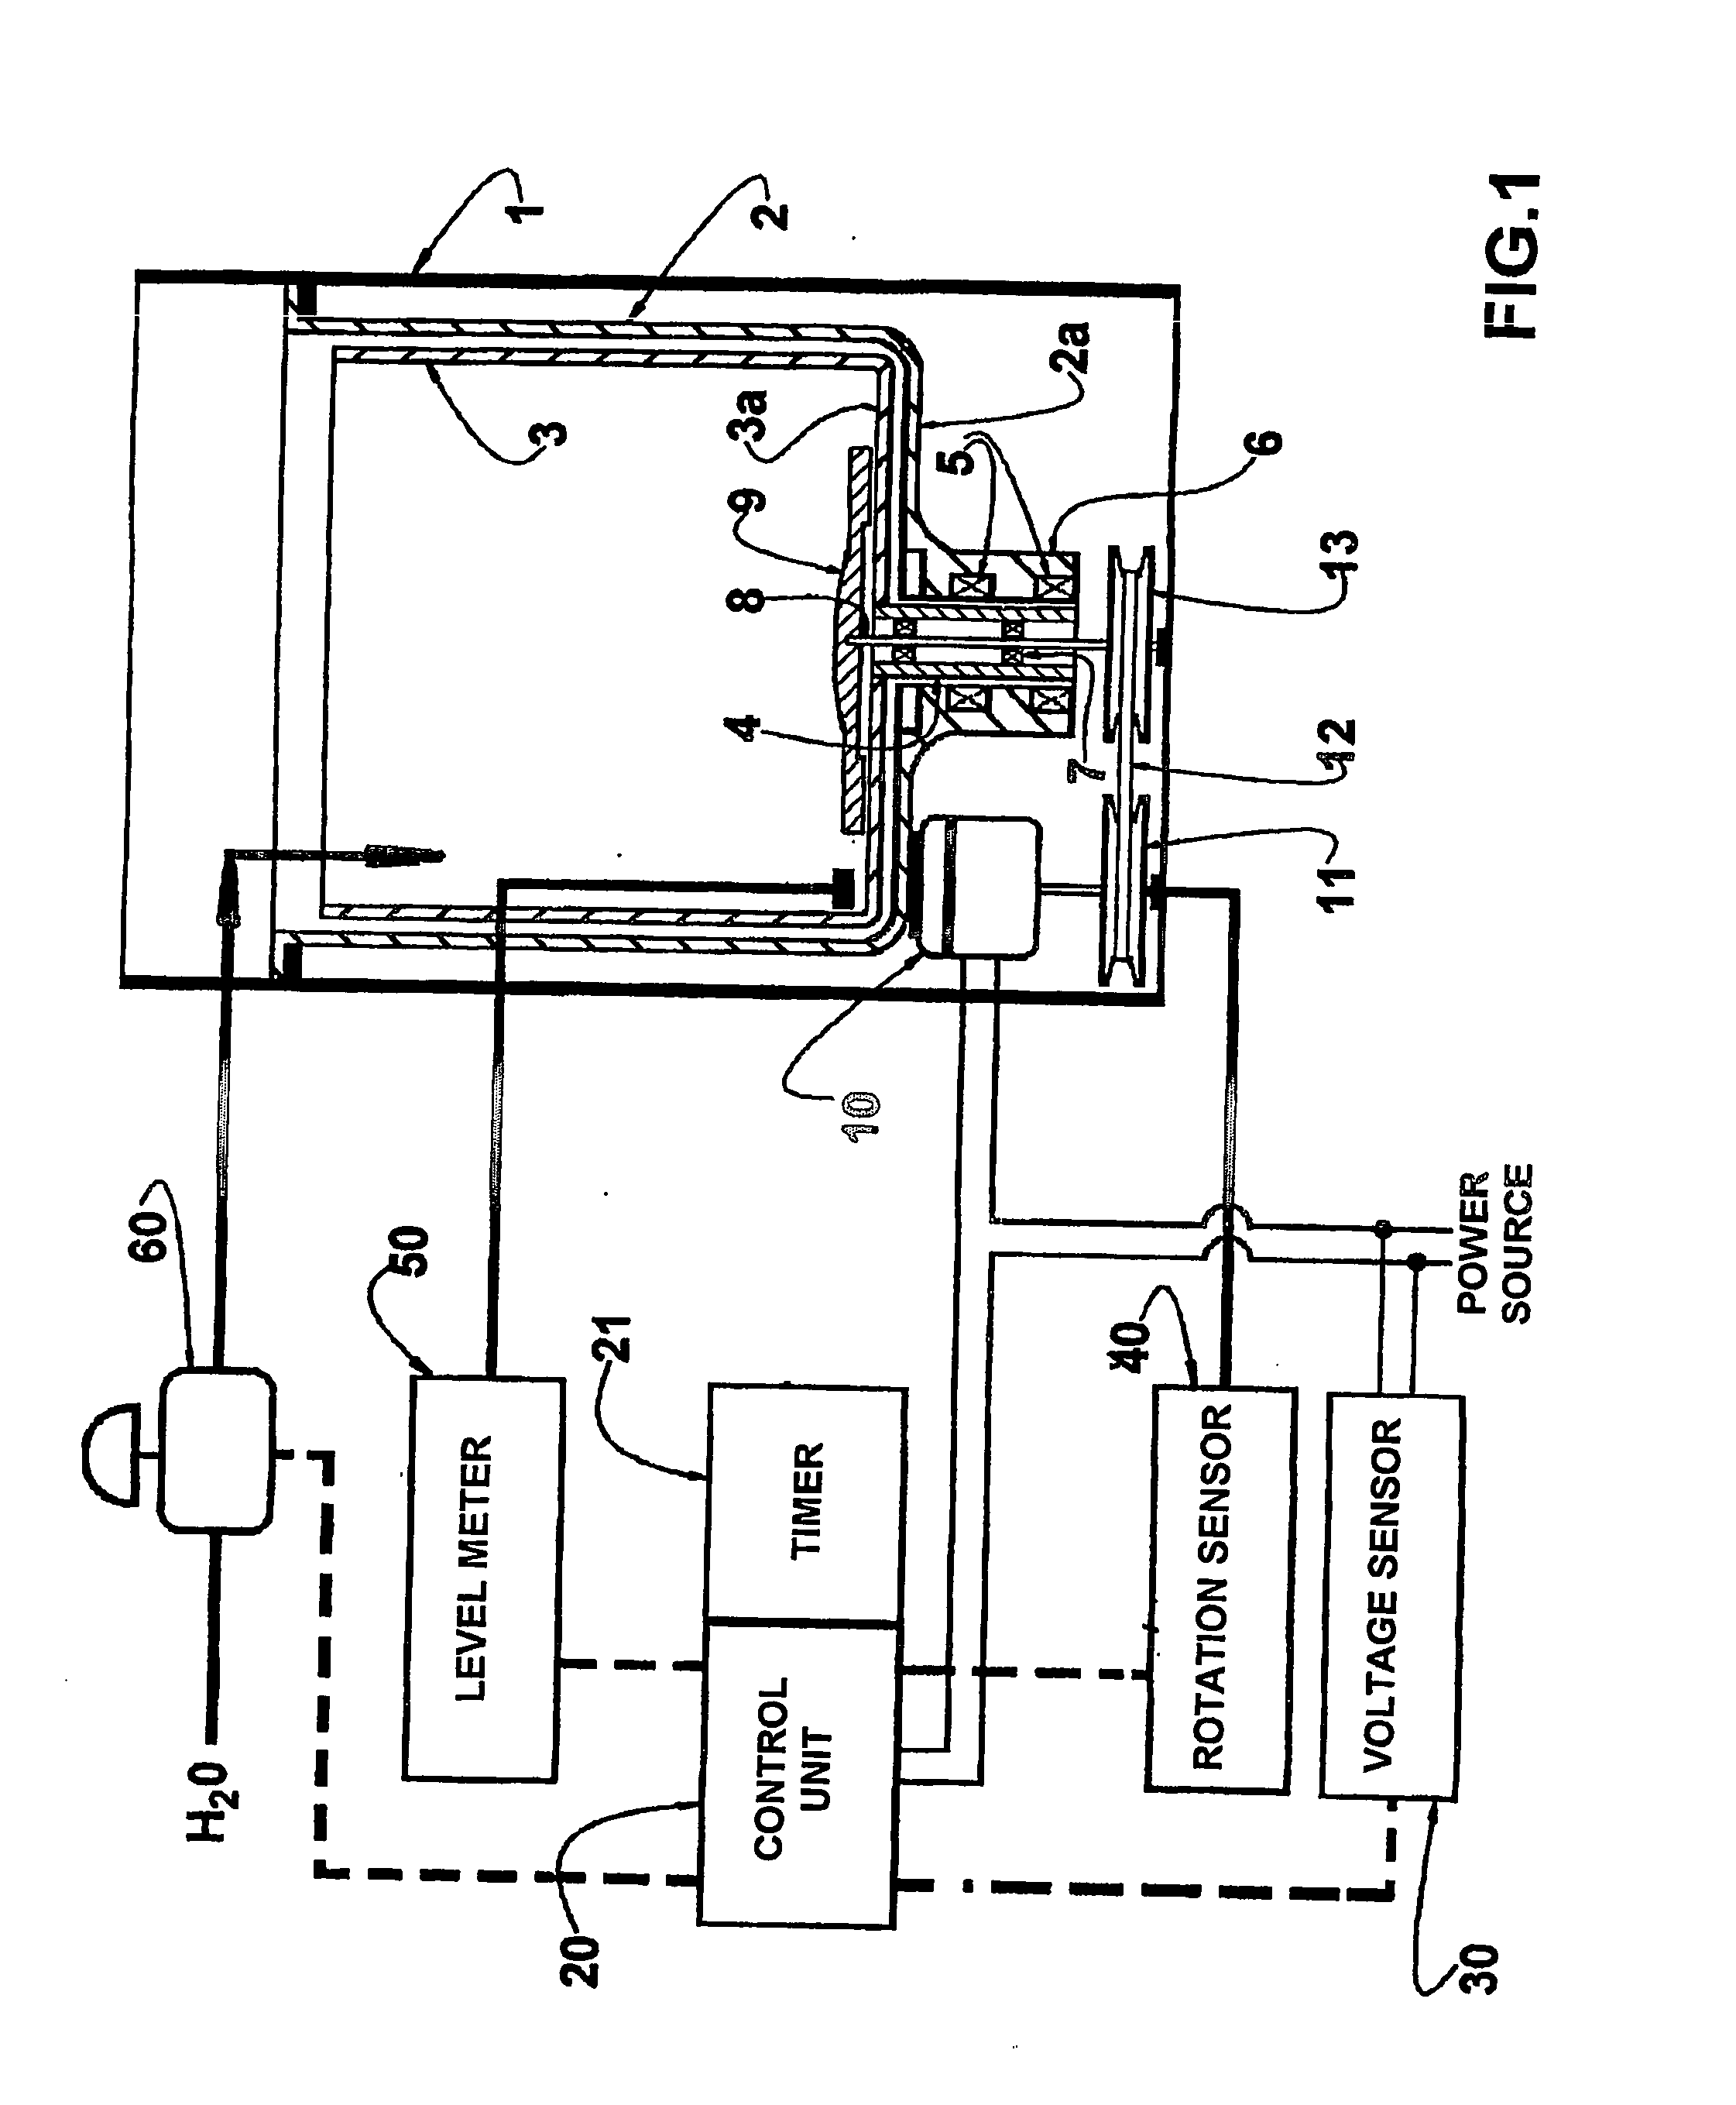 System and process for detecting a load of clothes in an automatic laundry machine